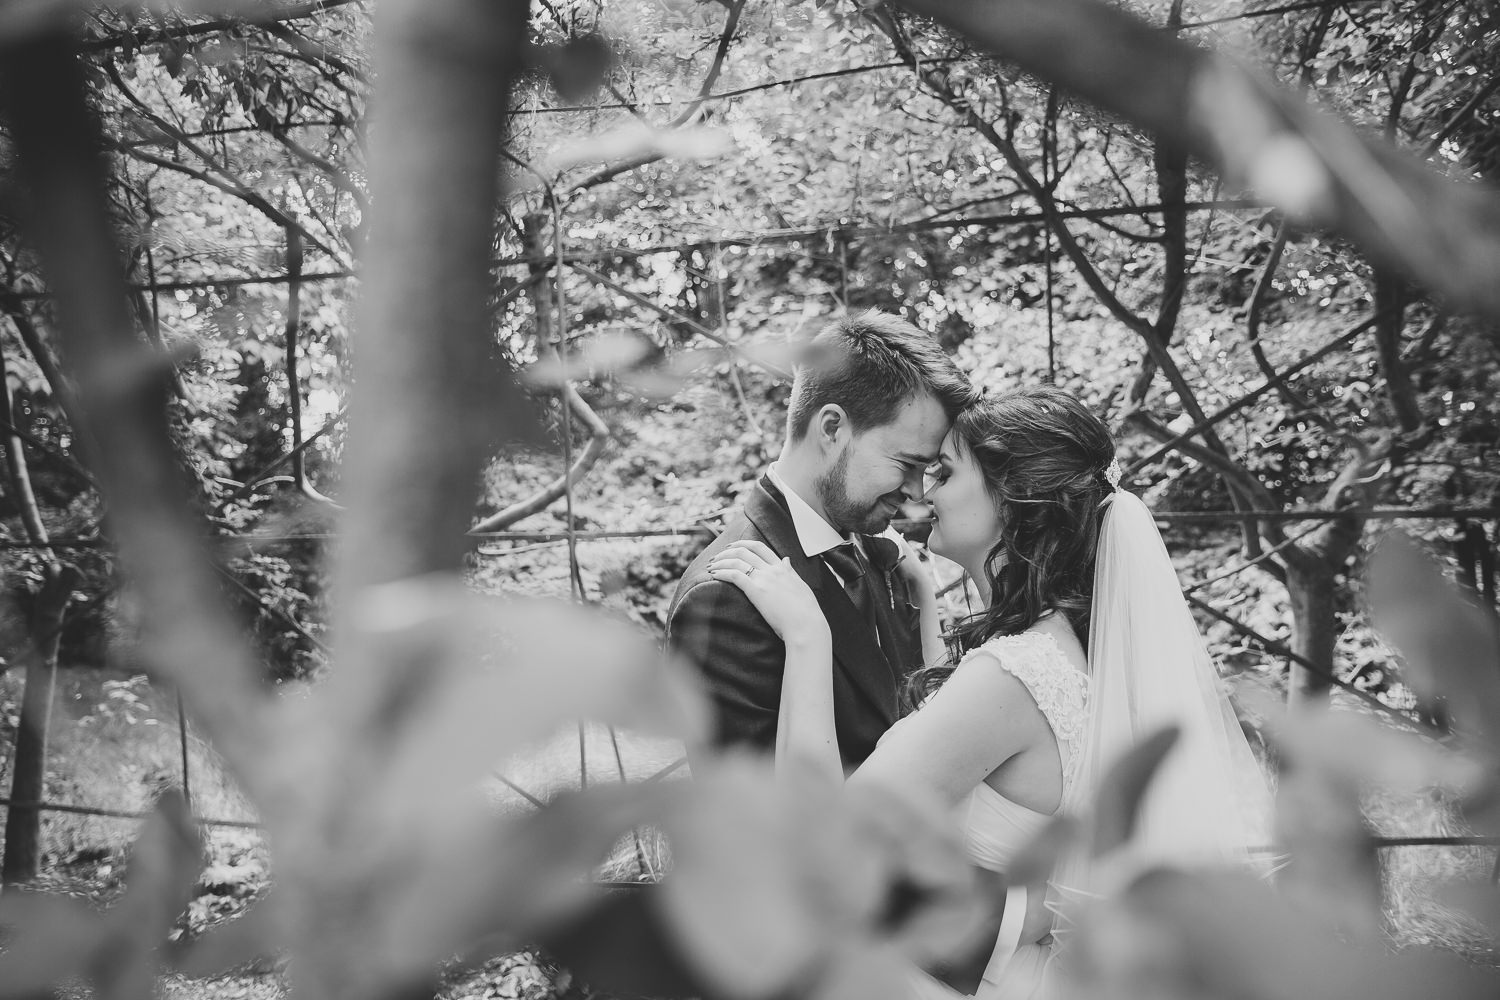 Black and white wedding photography of bride and groom in the park.